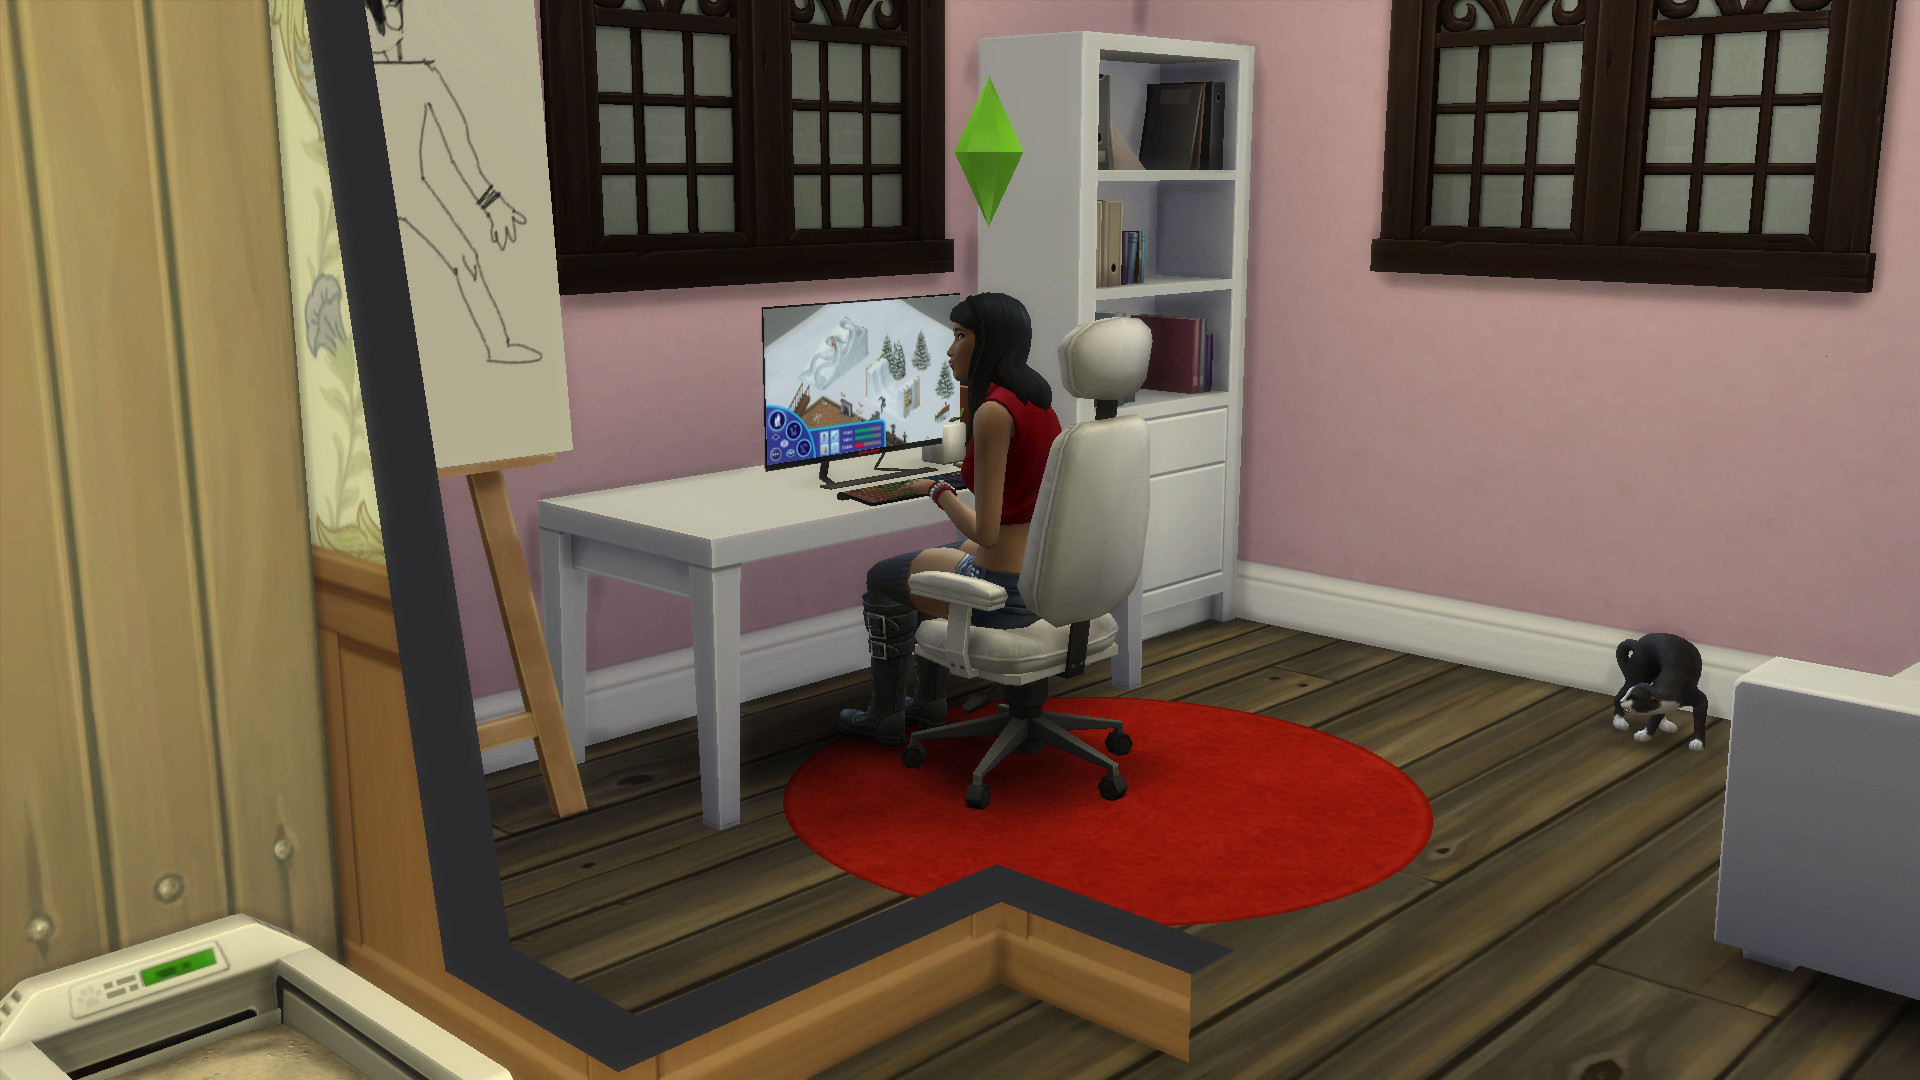 A sim plays The Sims on a custom content computer.